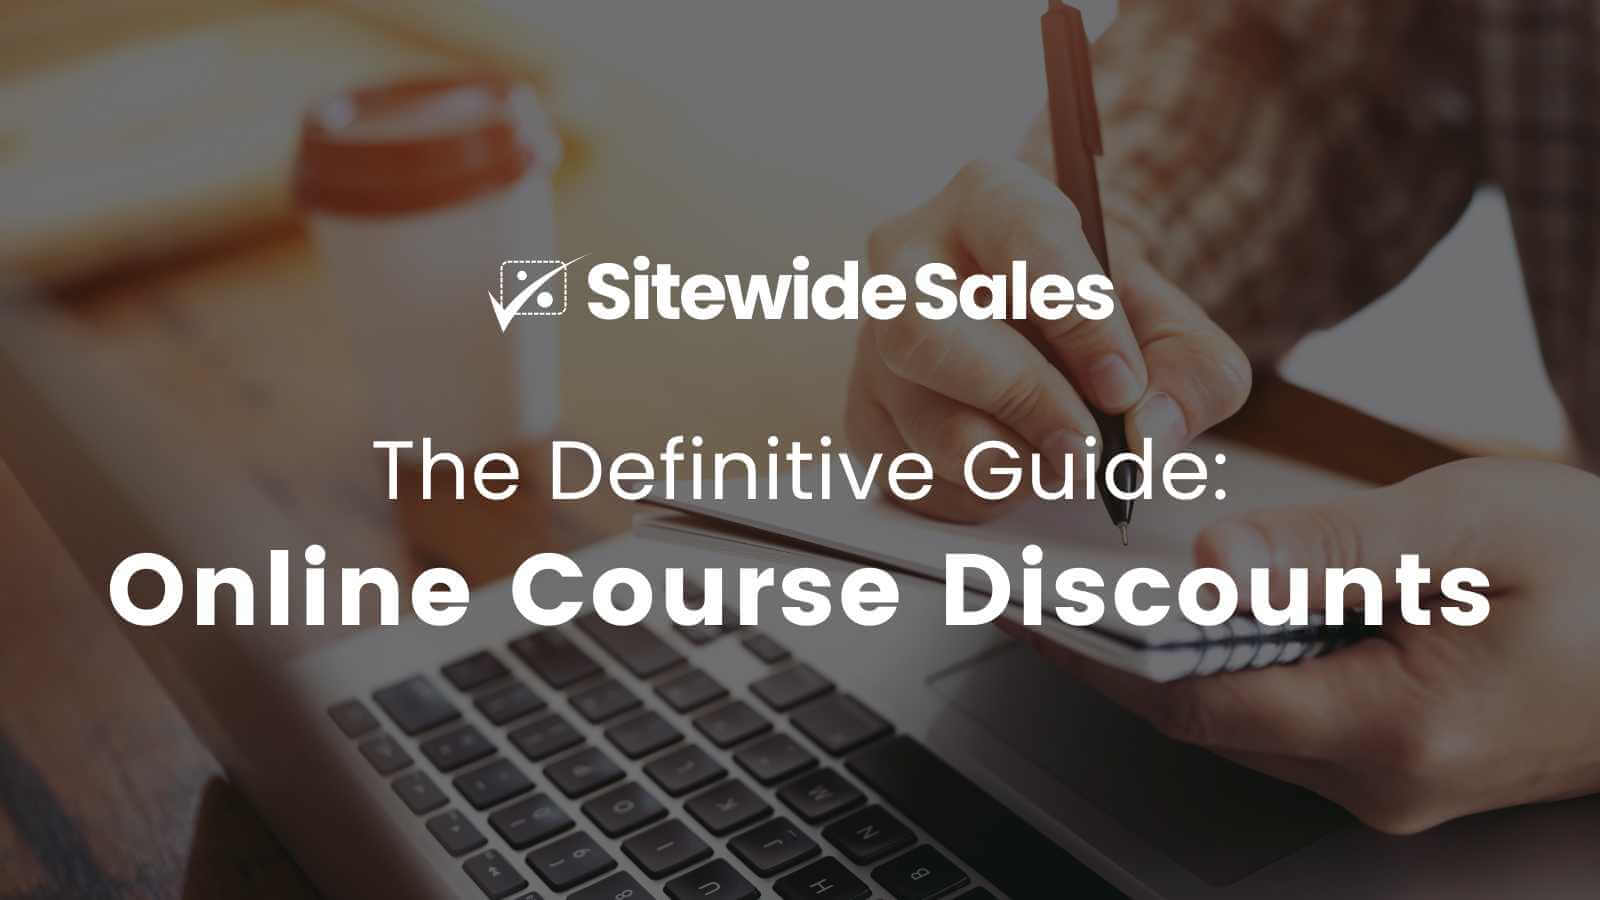 The Definitive Guide to Discounts on Online Courses: Attract Customers and Boost Revenue Using Flash Sales